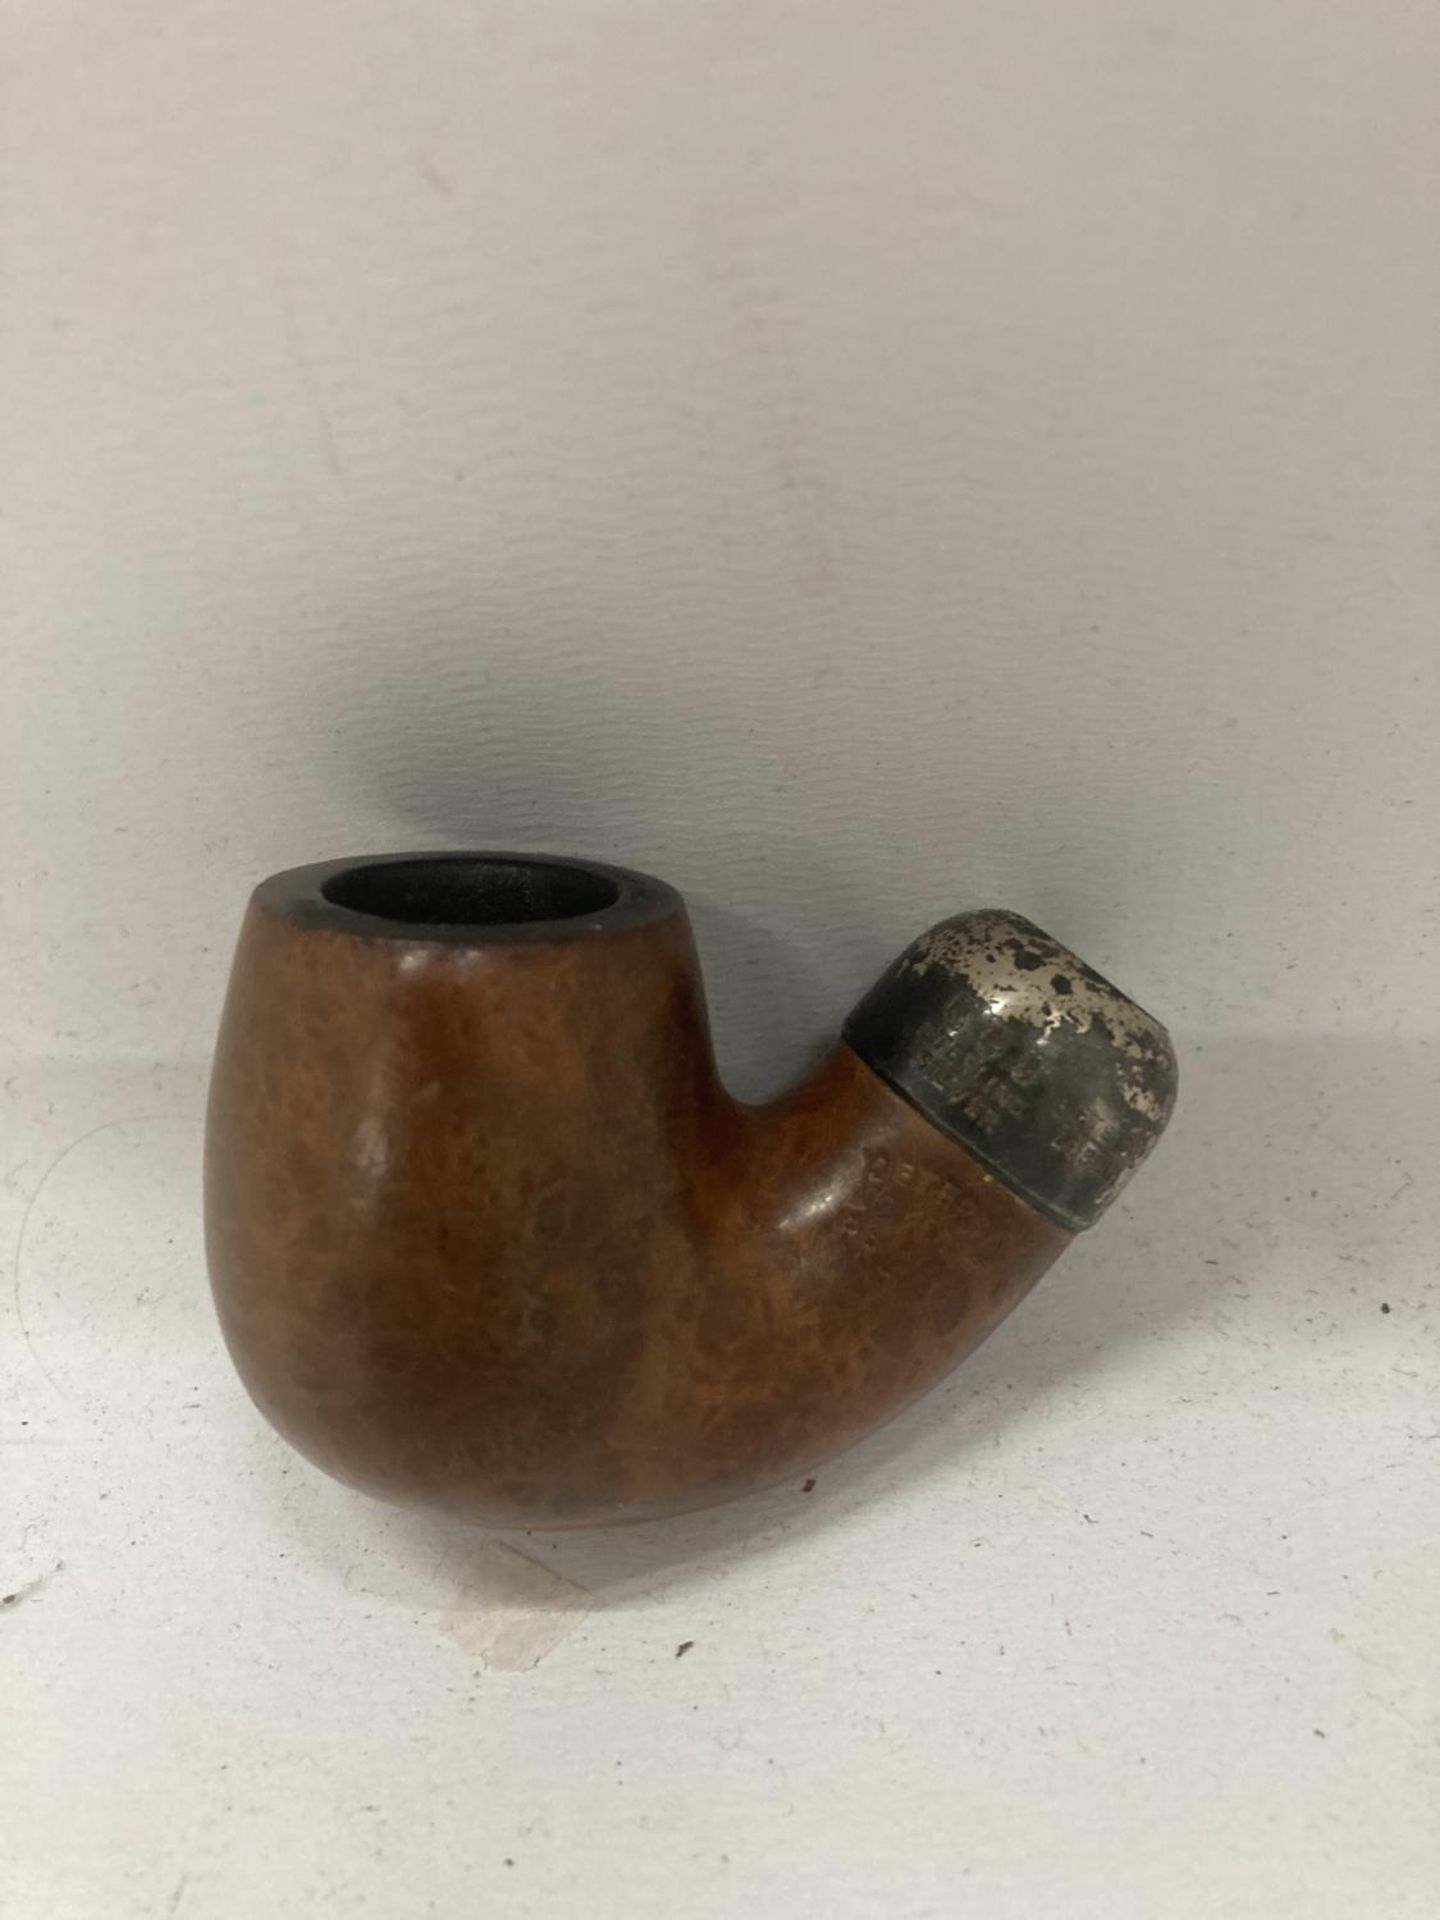 A PETERSONS SYSTEM PREMIER 317 PIPE BOWL DUBLIN WITH STERLING SILVER COLLAR - Bild 3 aus 3